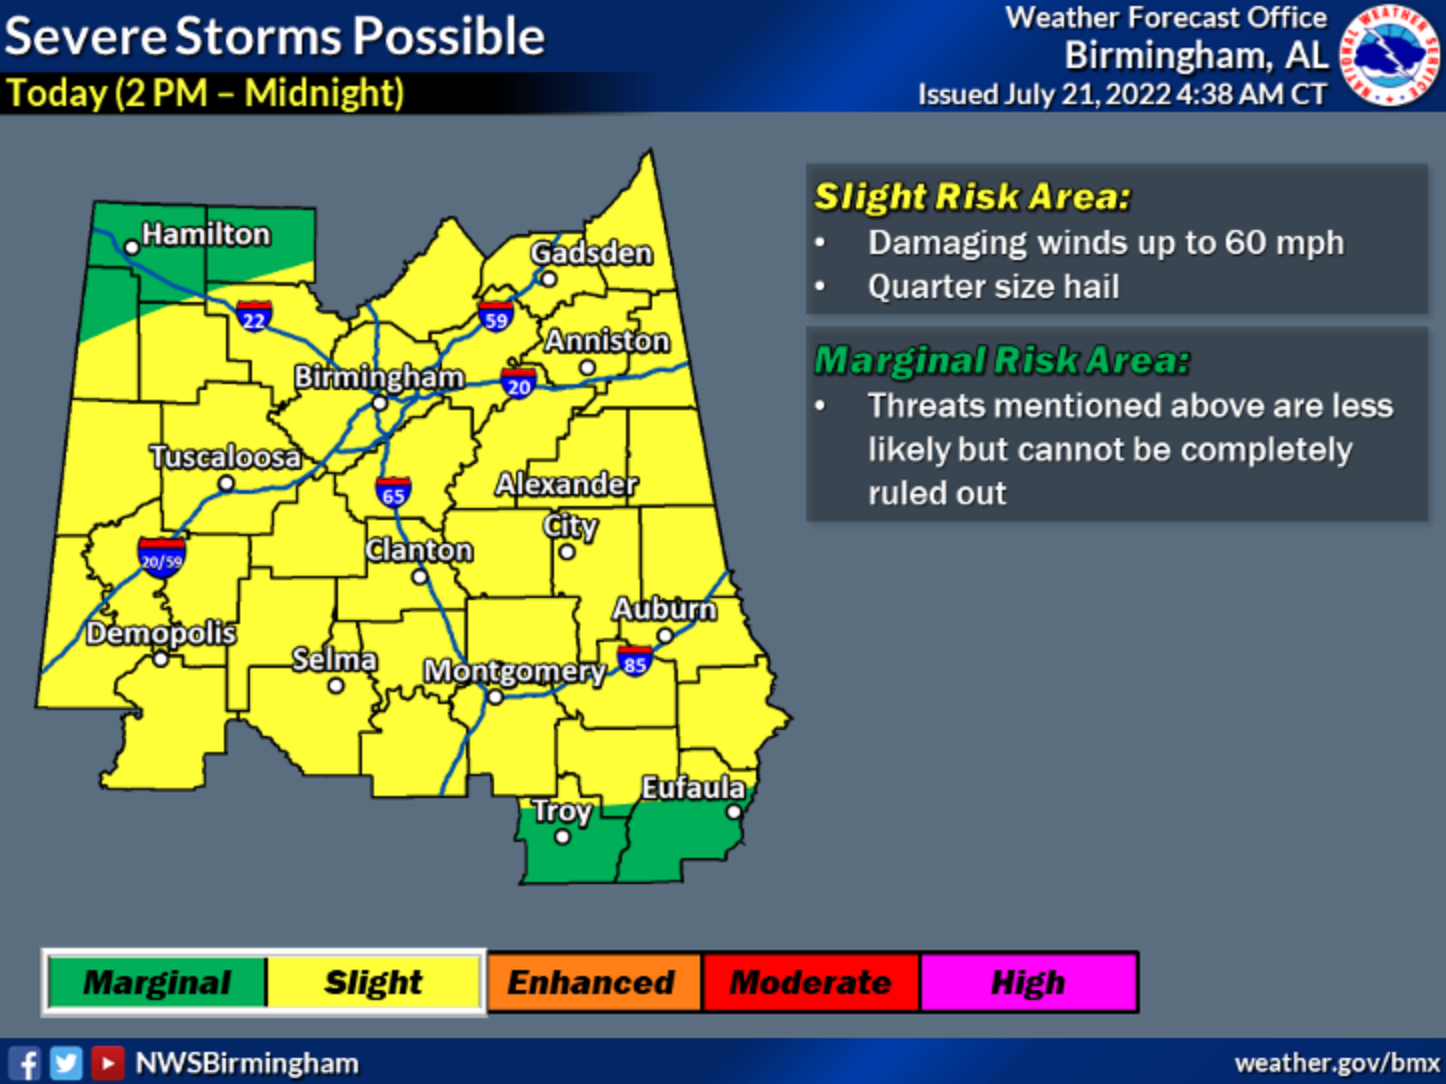 CANCELED: Severe Thunderstorm Warning issued for parts of Central Alabama